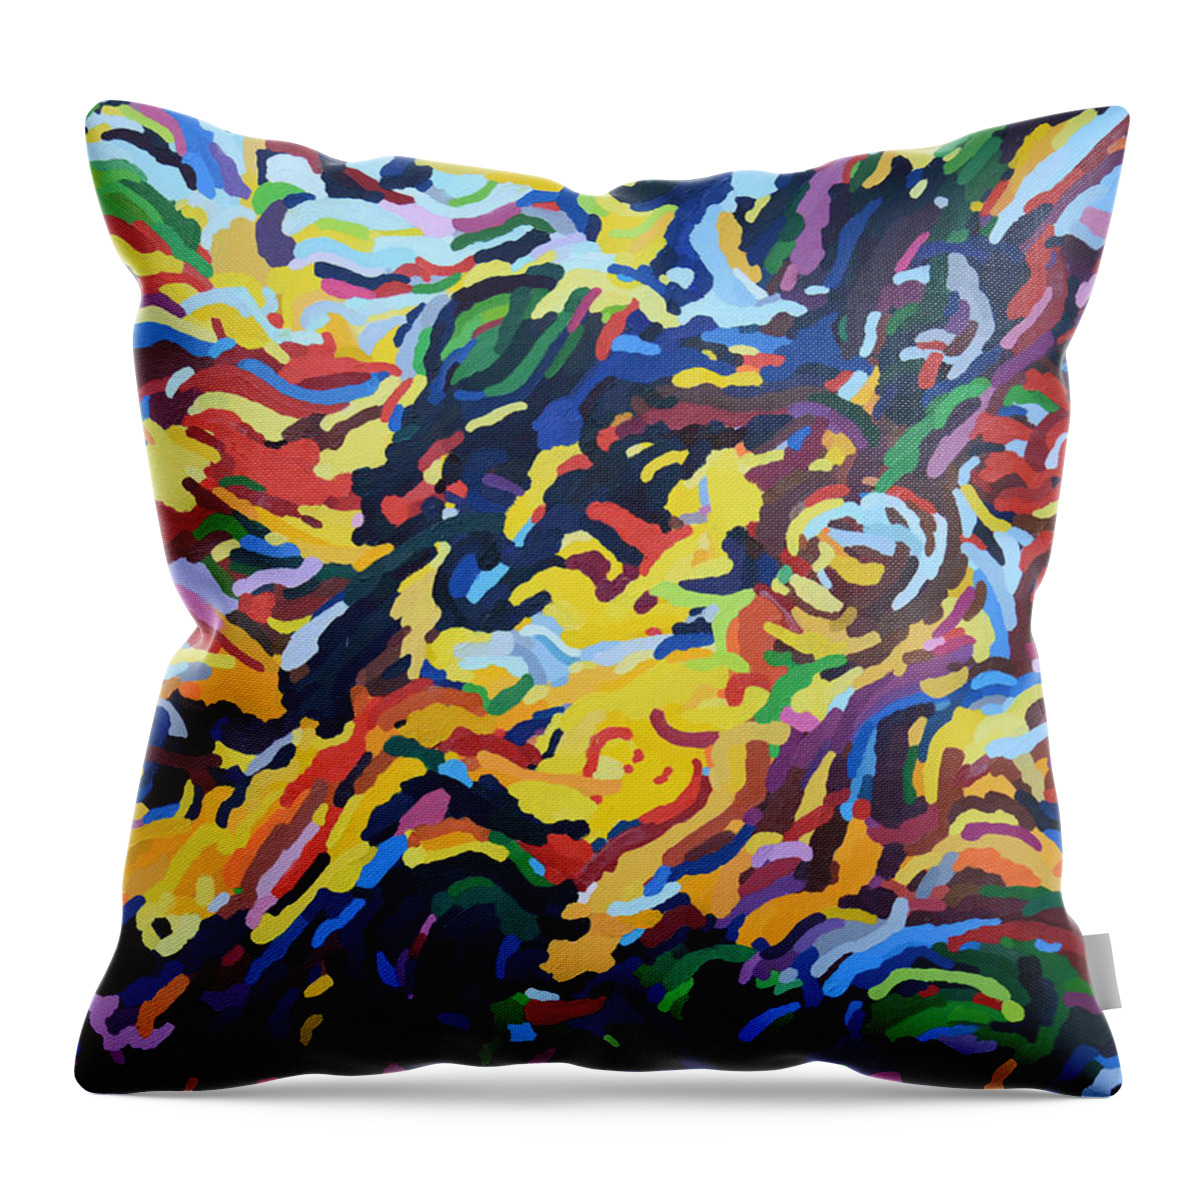  Throw Pillow featuring the painting Beckoning by John Napoli